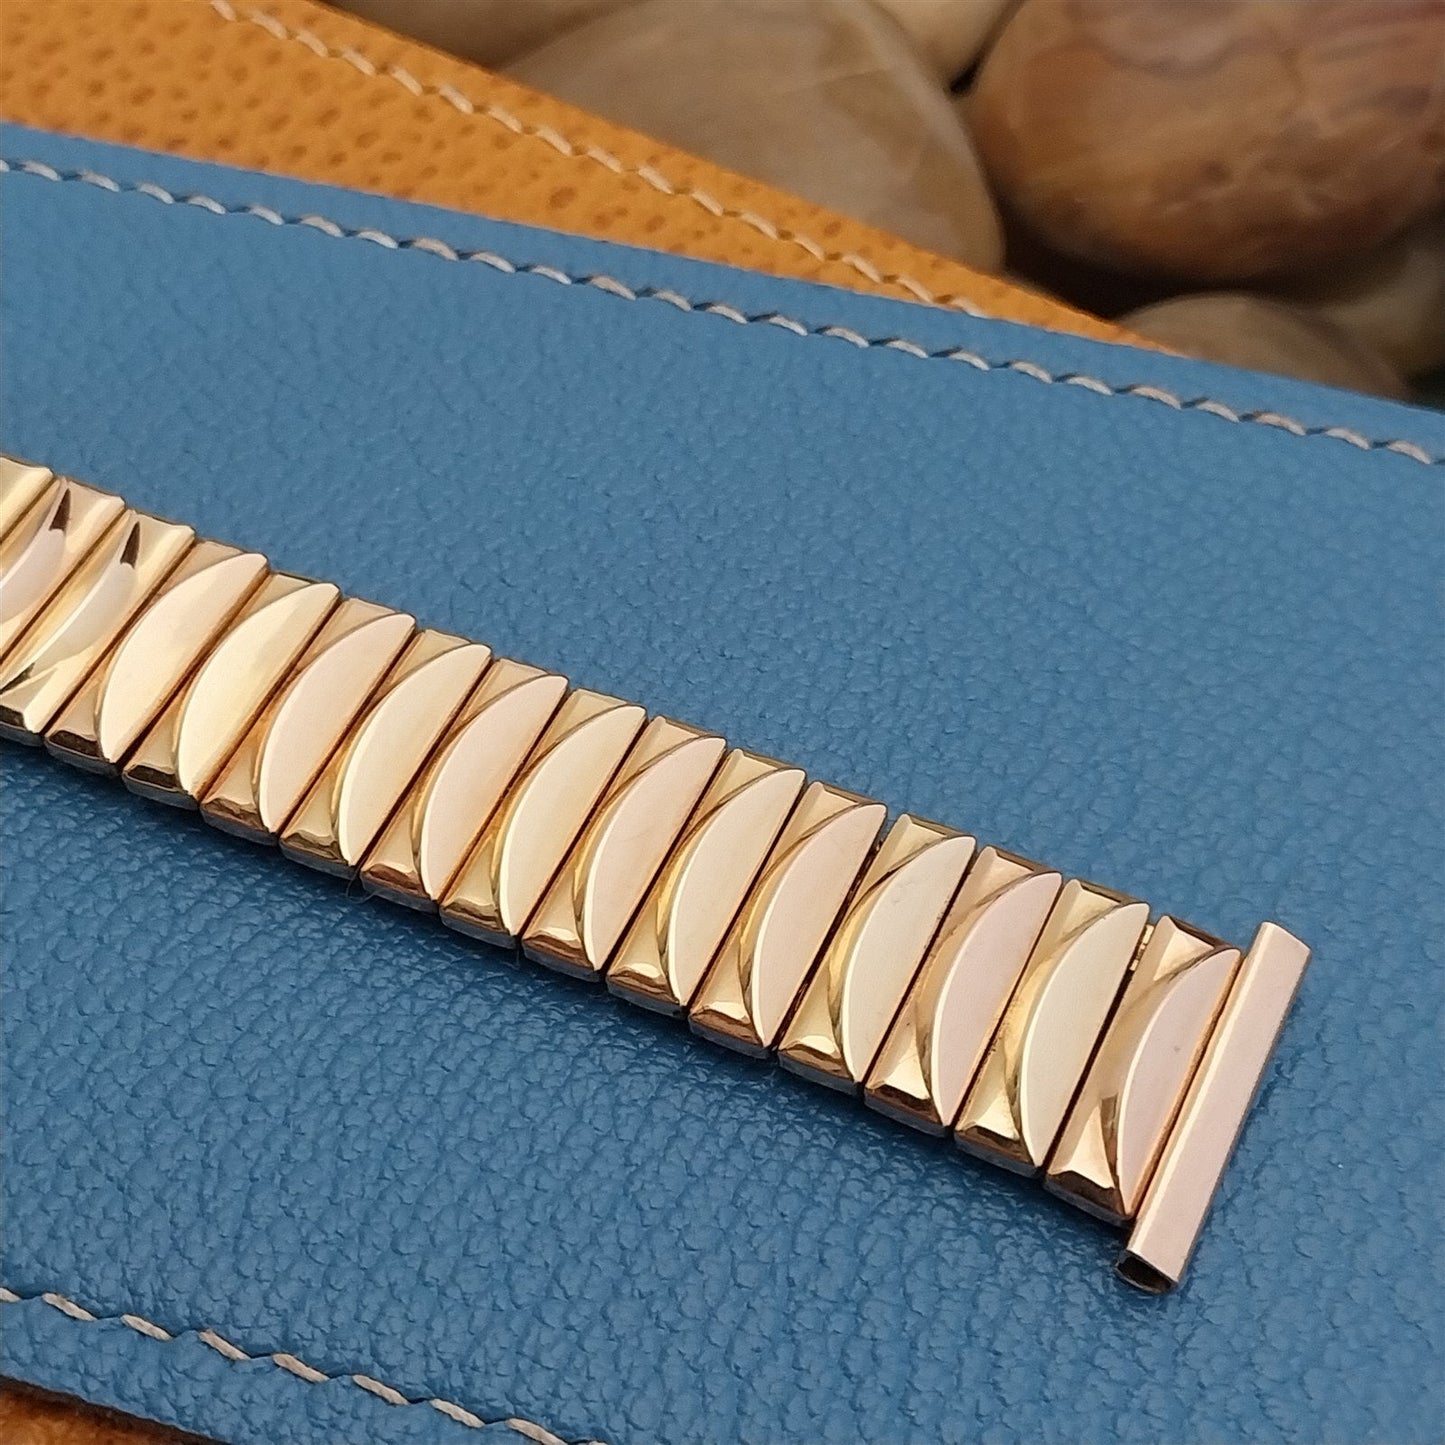 1940s Harwood Expansion Rose & Yellow Gold Filled Unused Vintage Watch Band